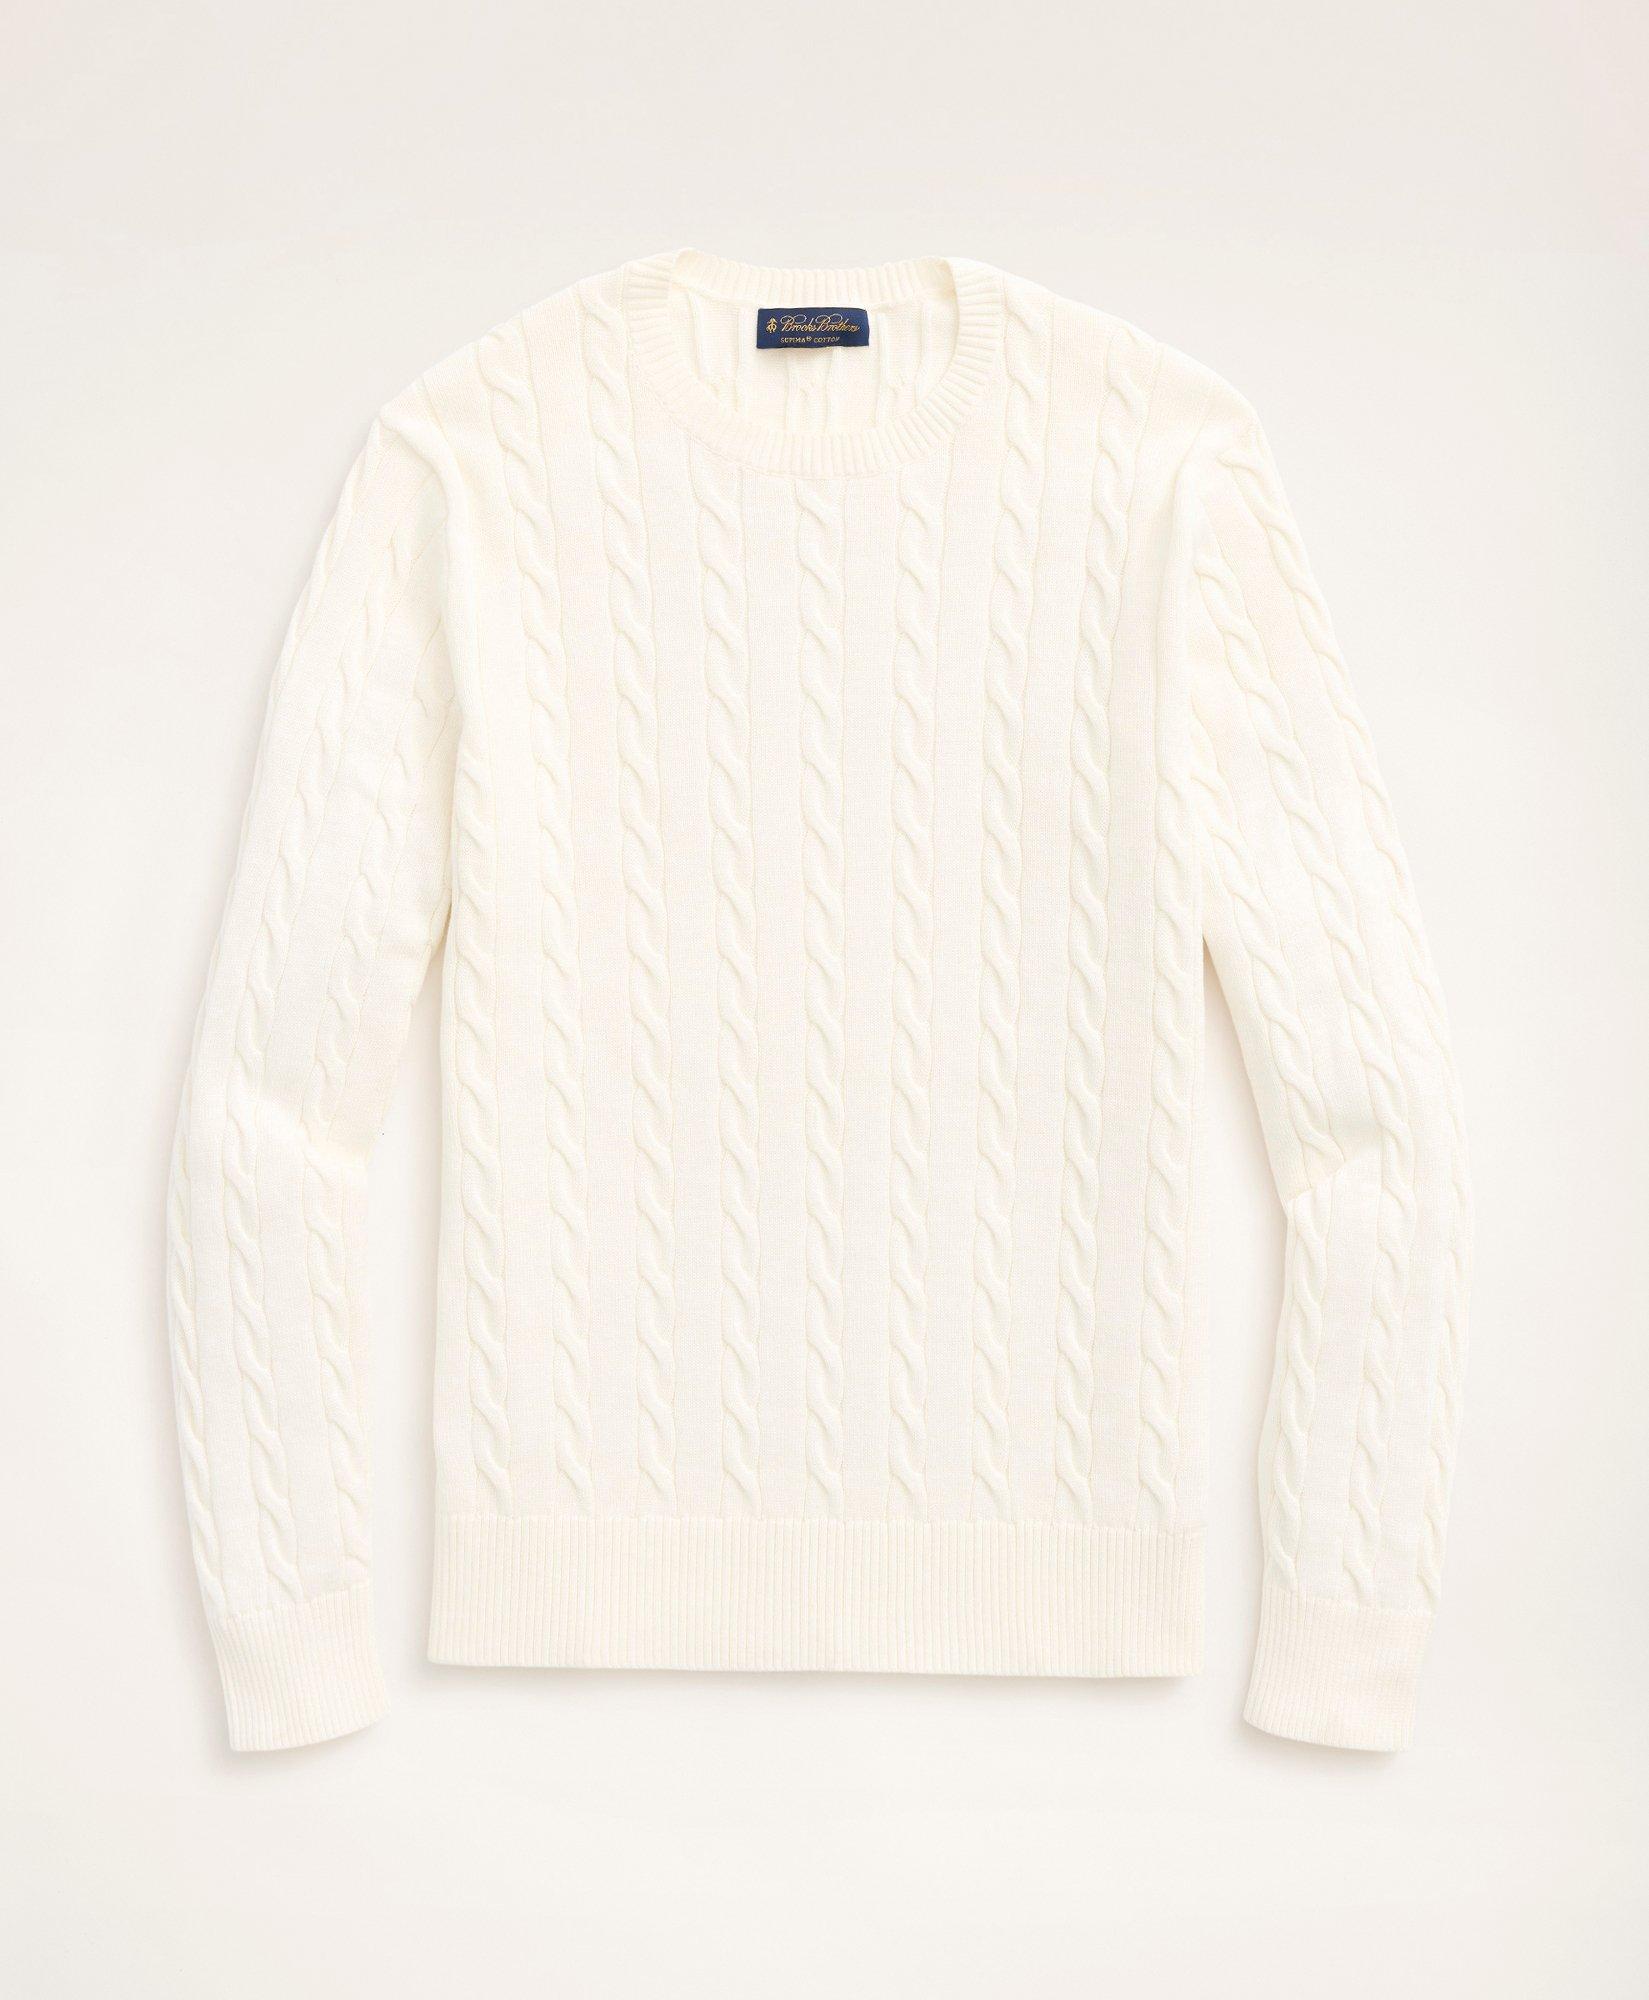 Brooks Brothers Big & Tall Supima Cotton Cable Crewneck Sweater | Ivory | Size 2x Tall